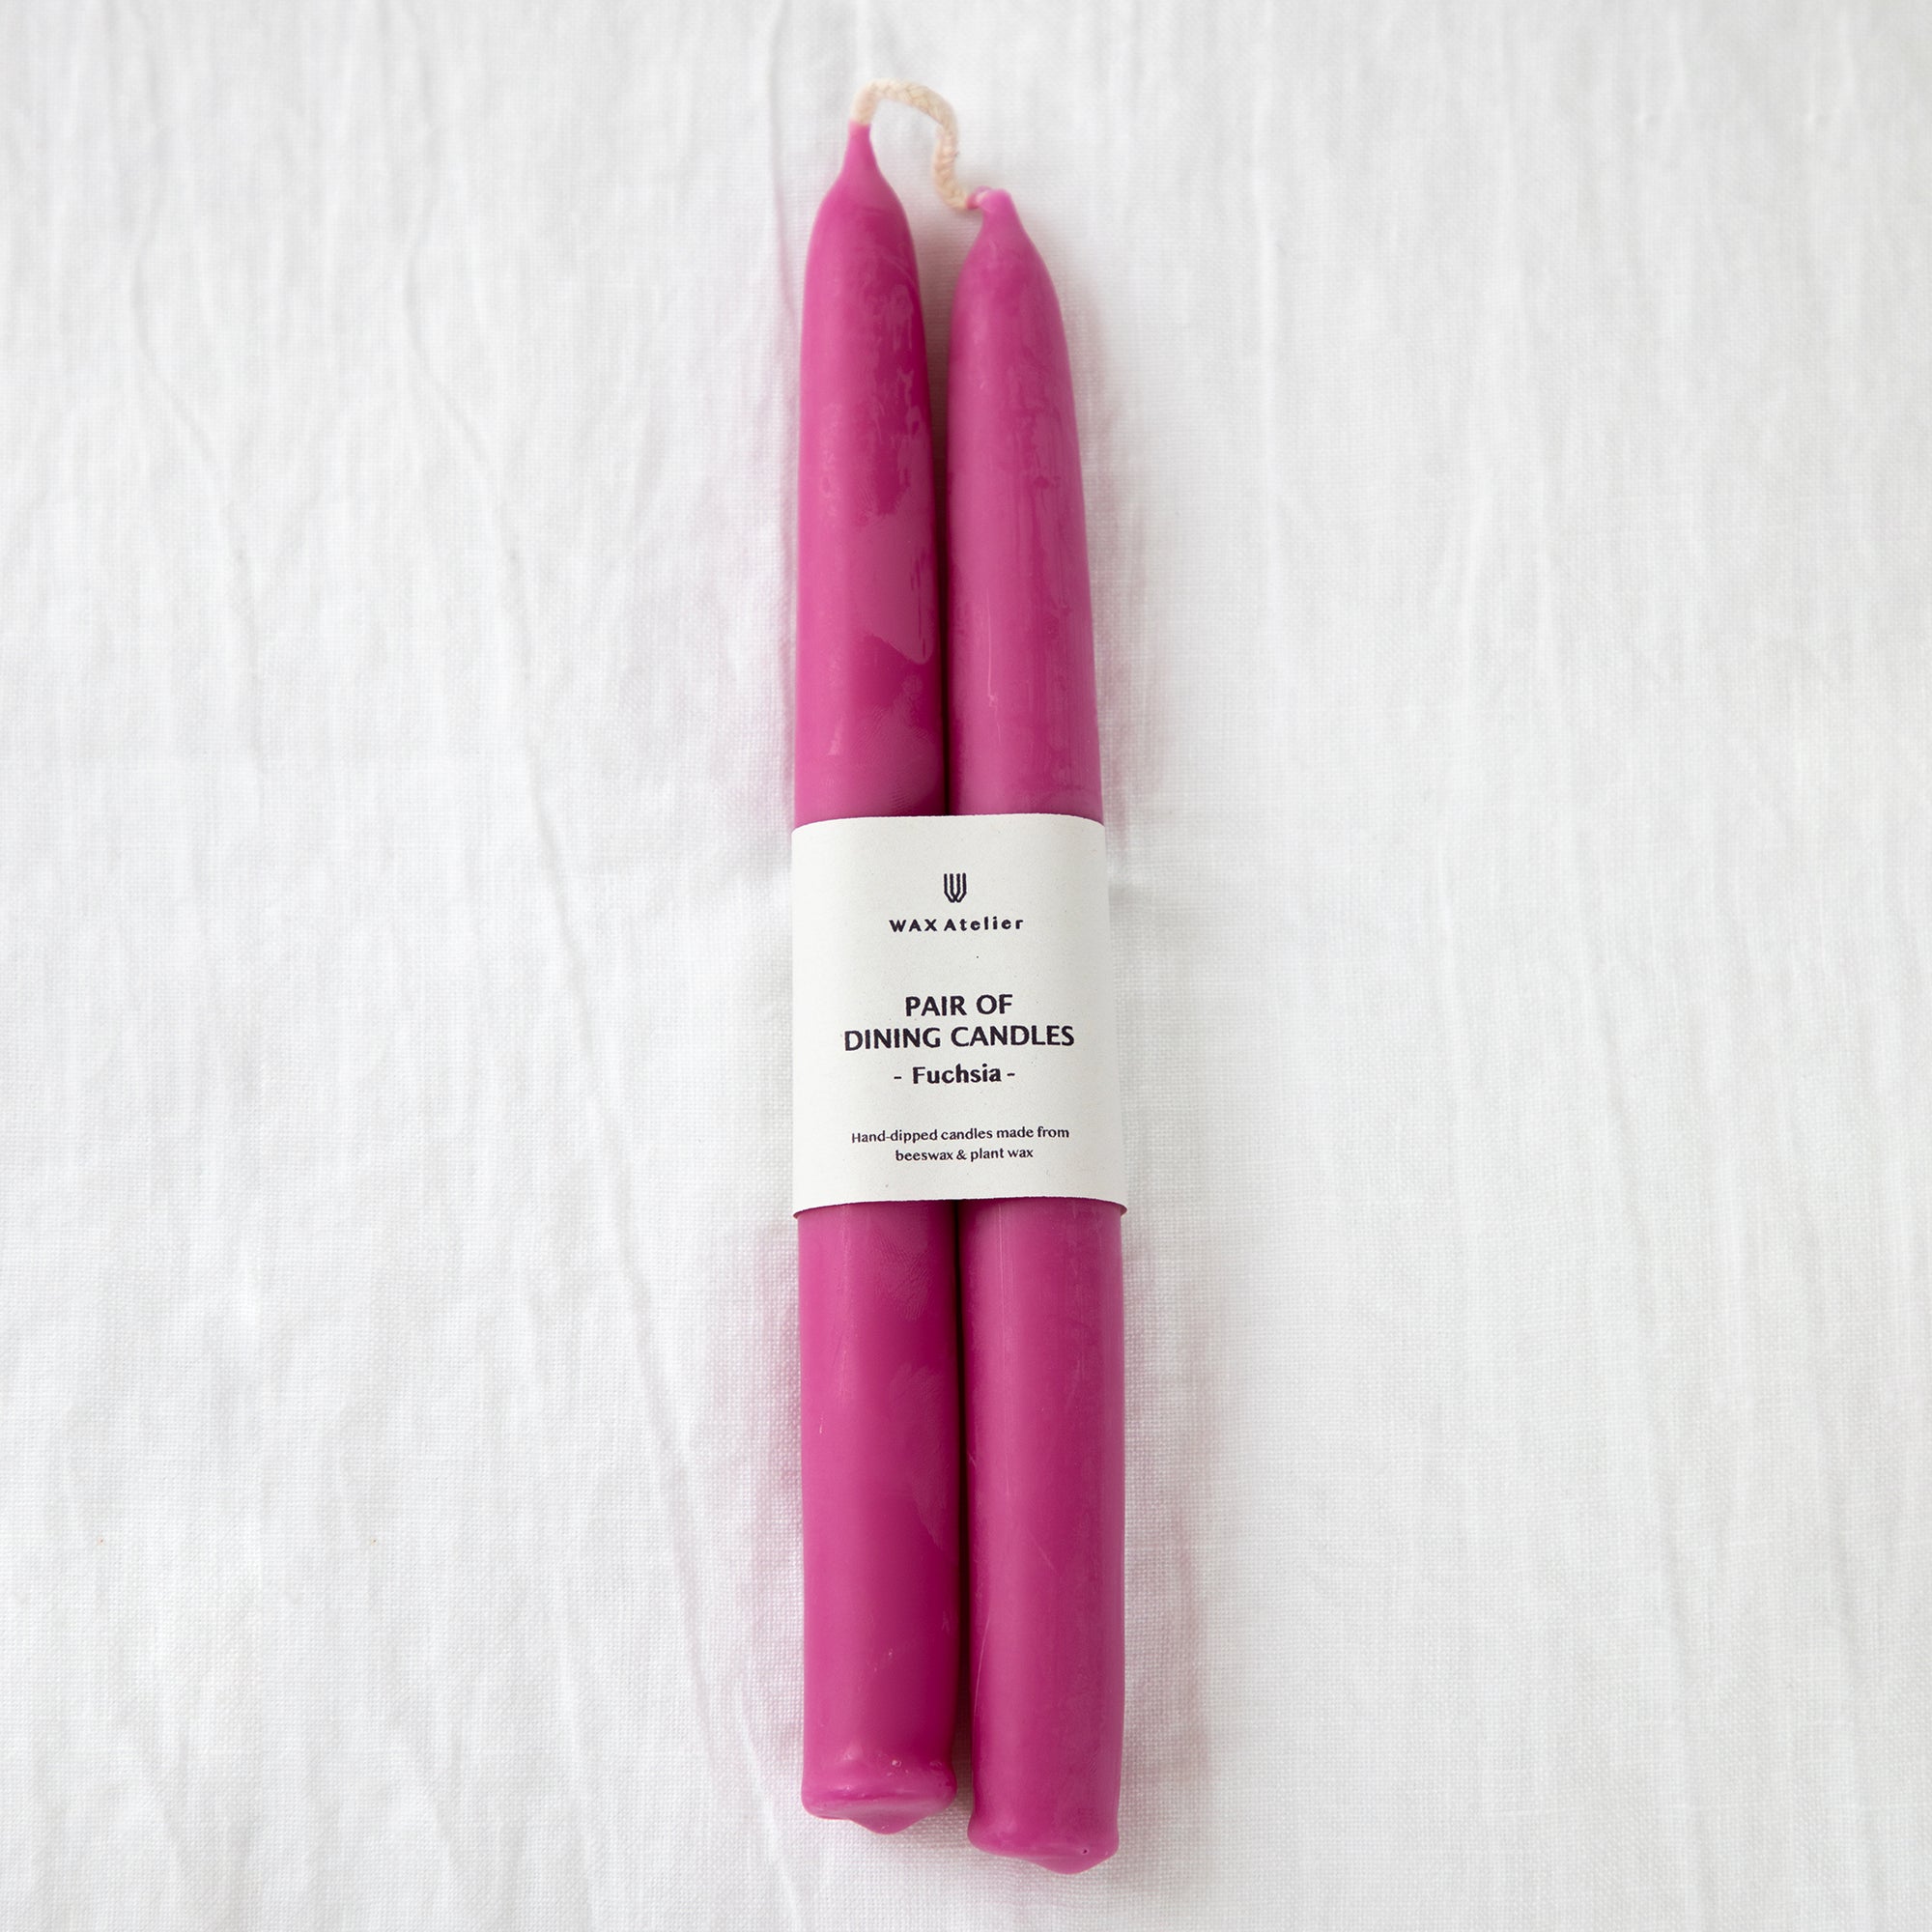 Wax Atelier Dining Candle Pair - Fuchsia